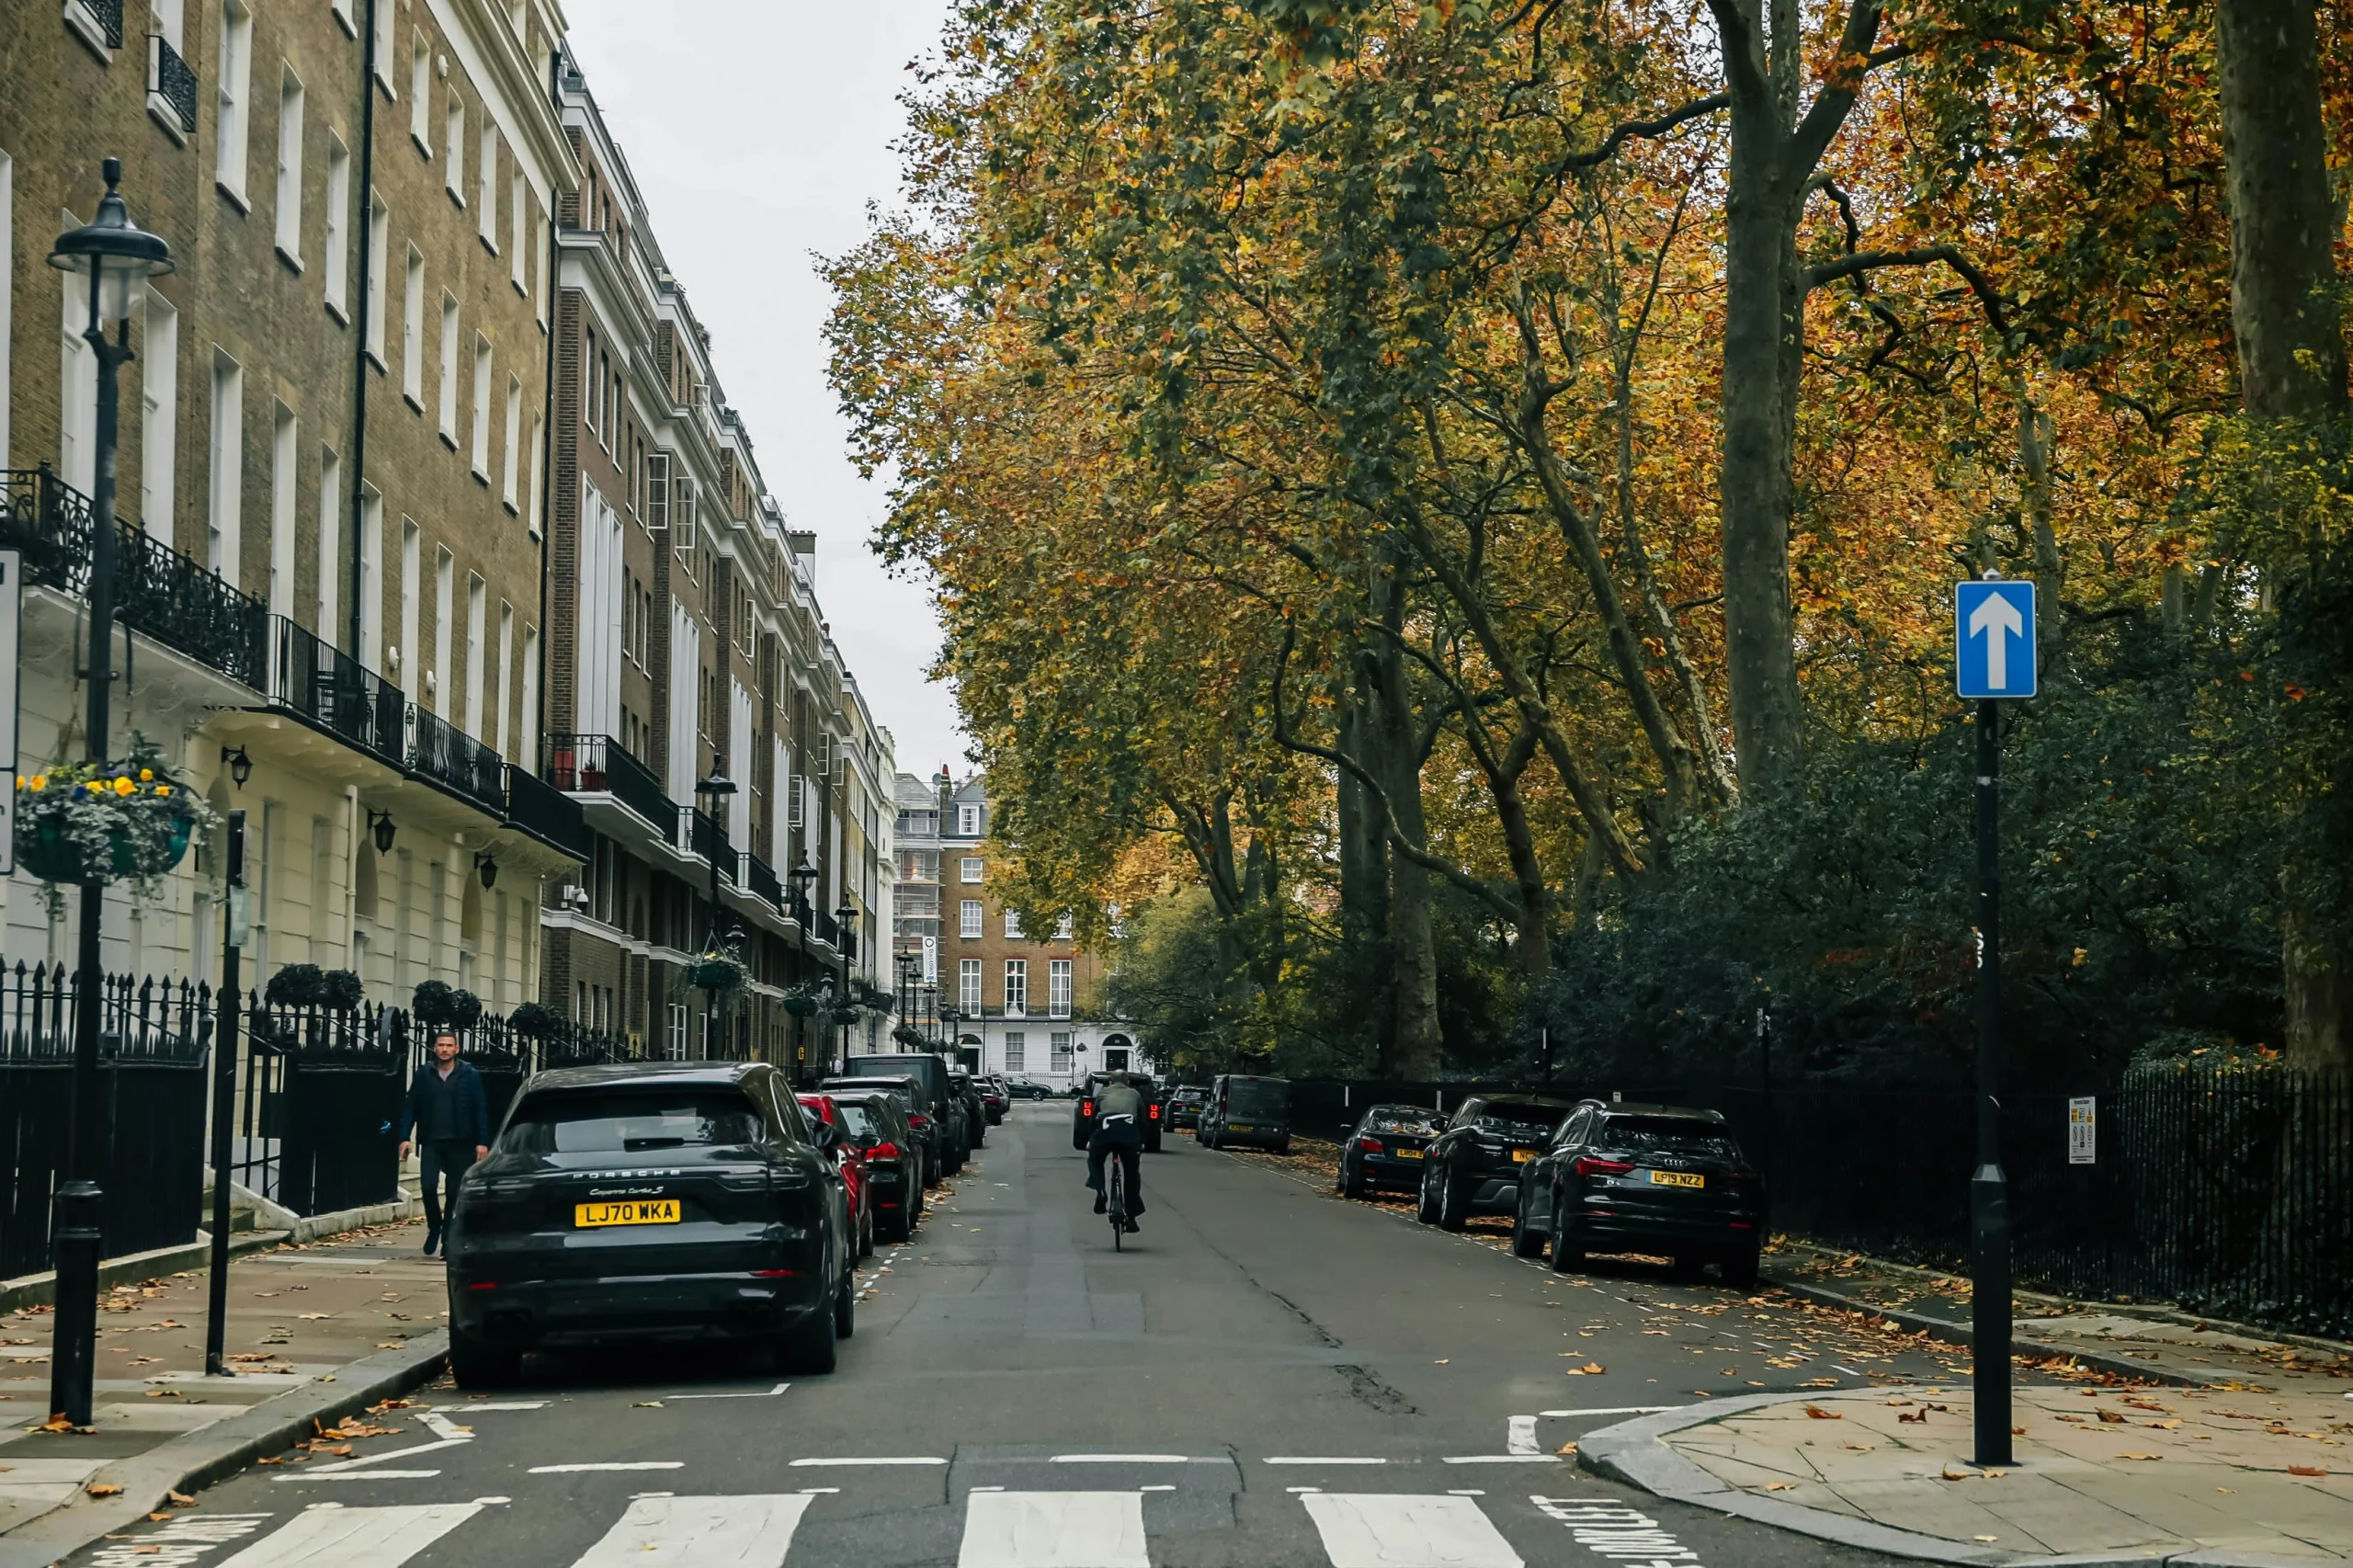 A tree-lined street in central London.